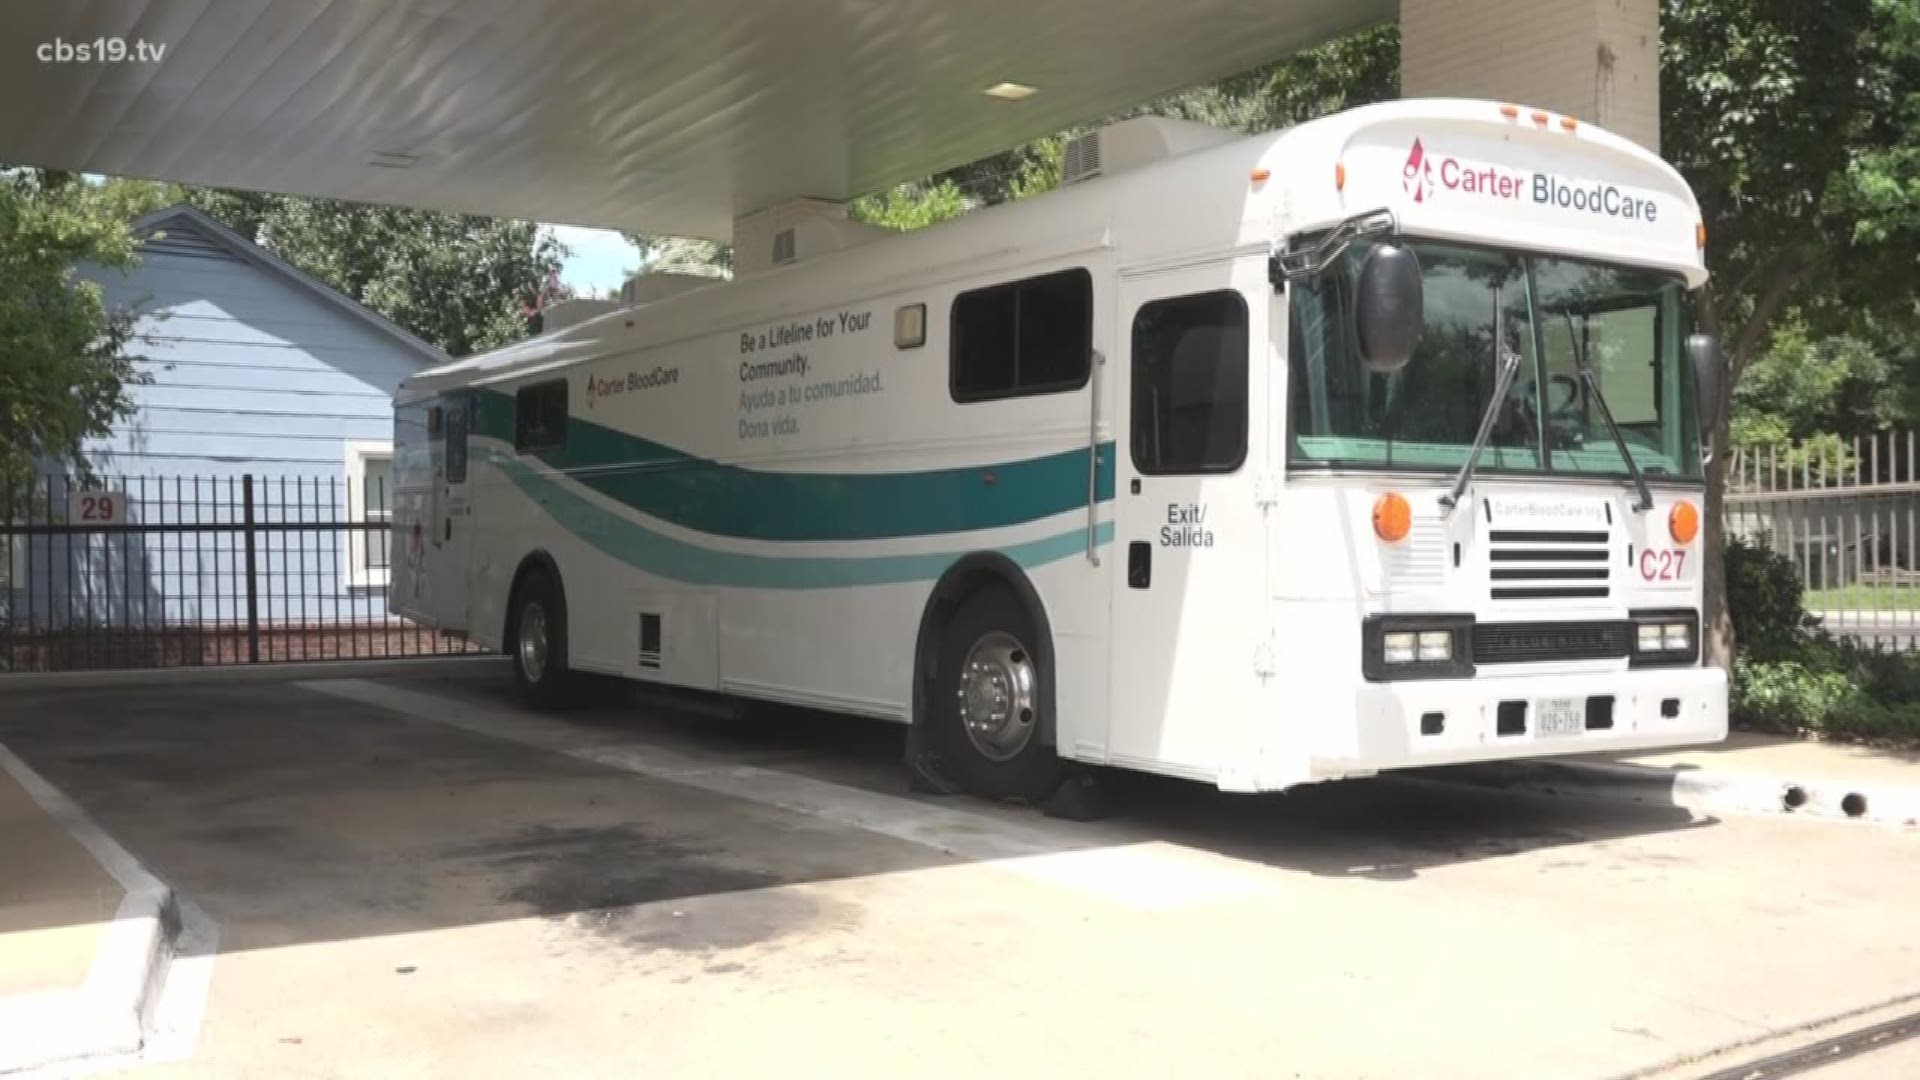 The blood drive will take place Monday, July 29, from 9 a.m. until 2 p.m. at the NET Health office, located at 815 North Broadway Avenue in Tyler.